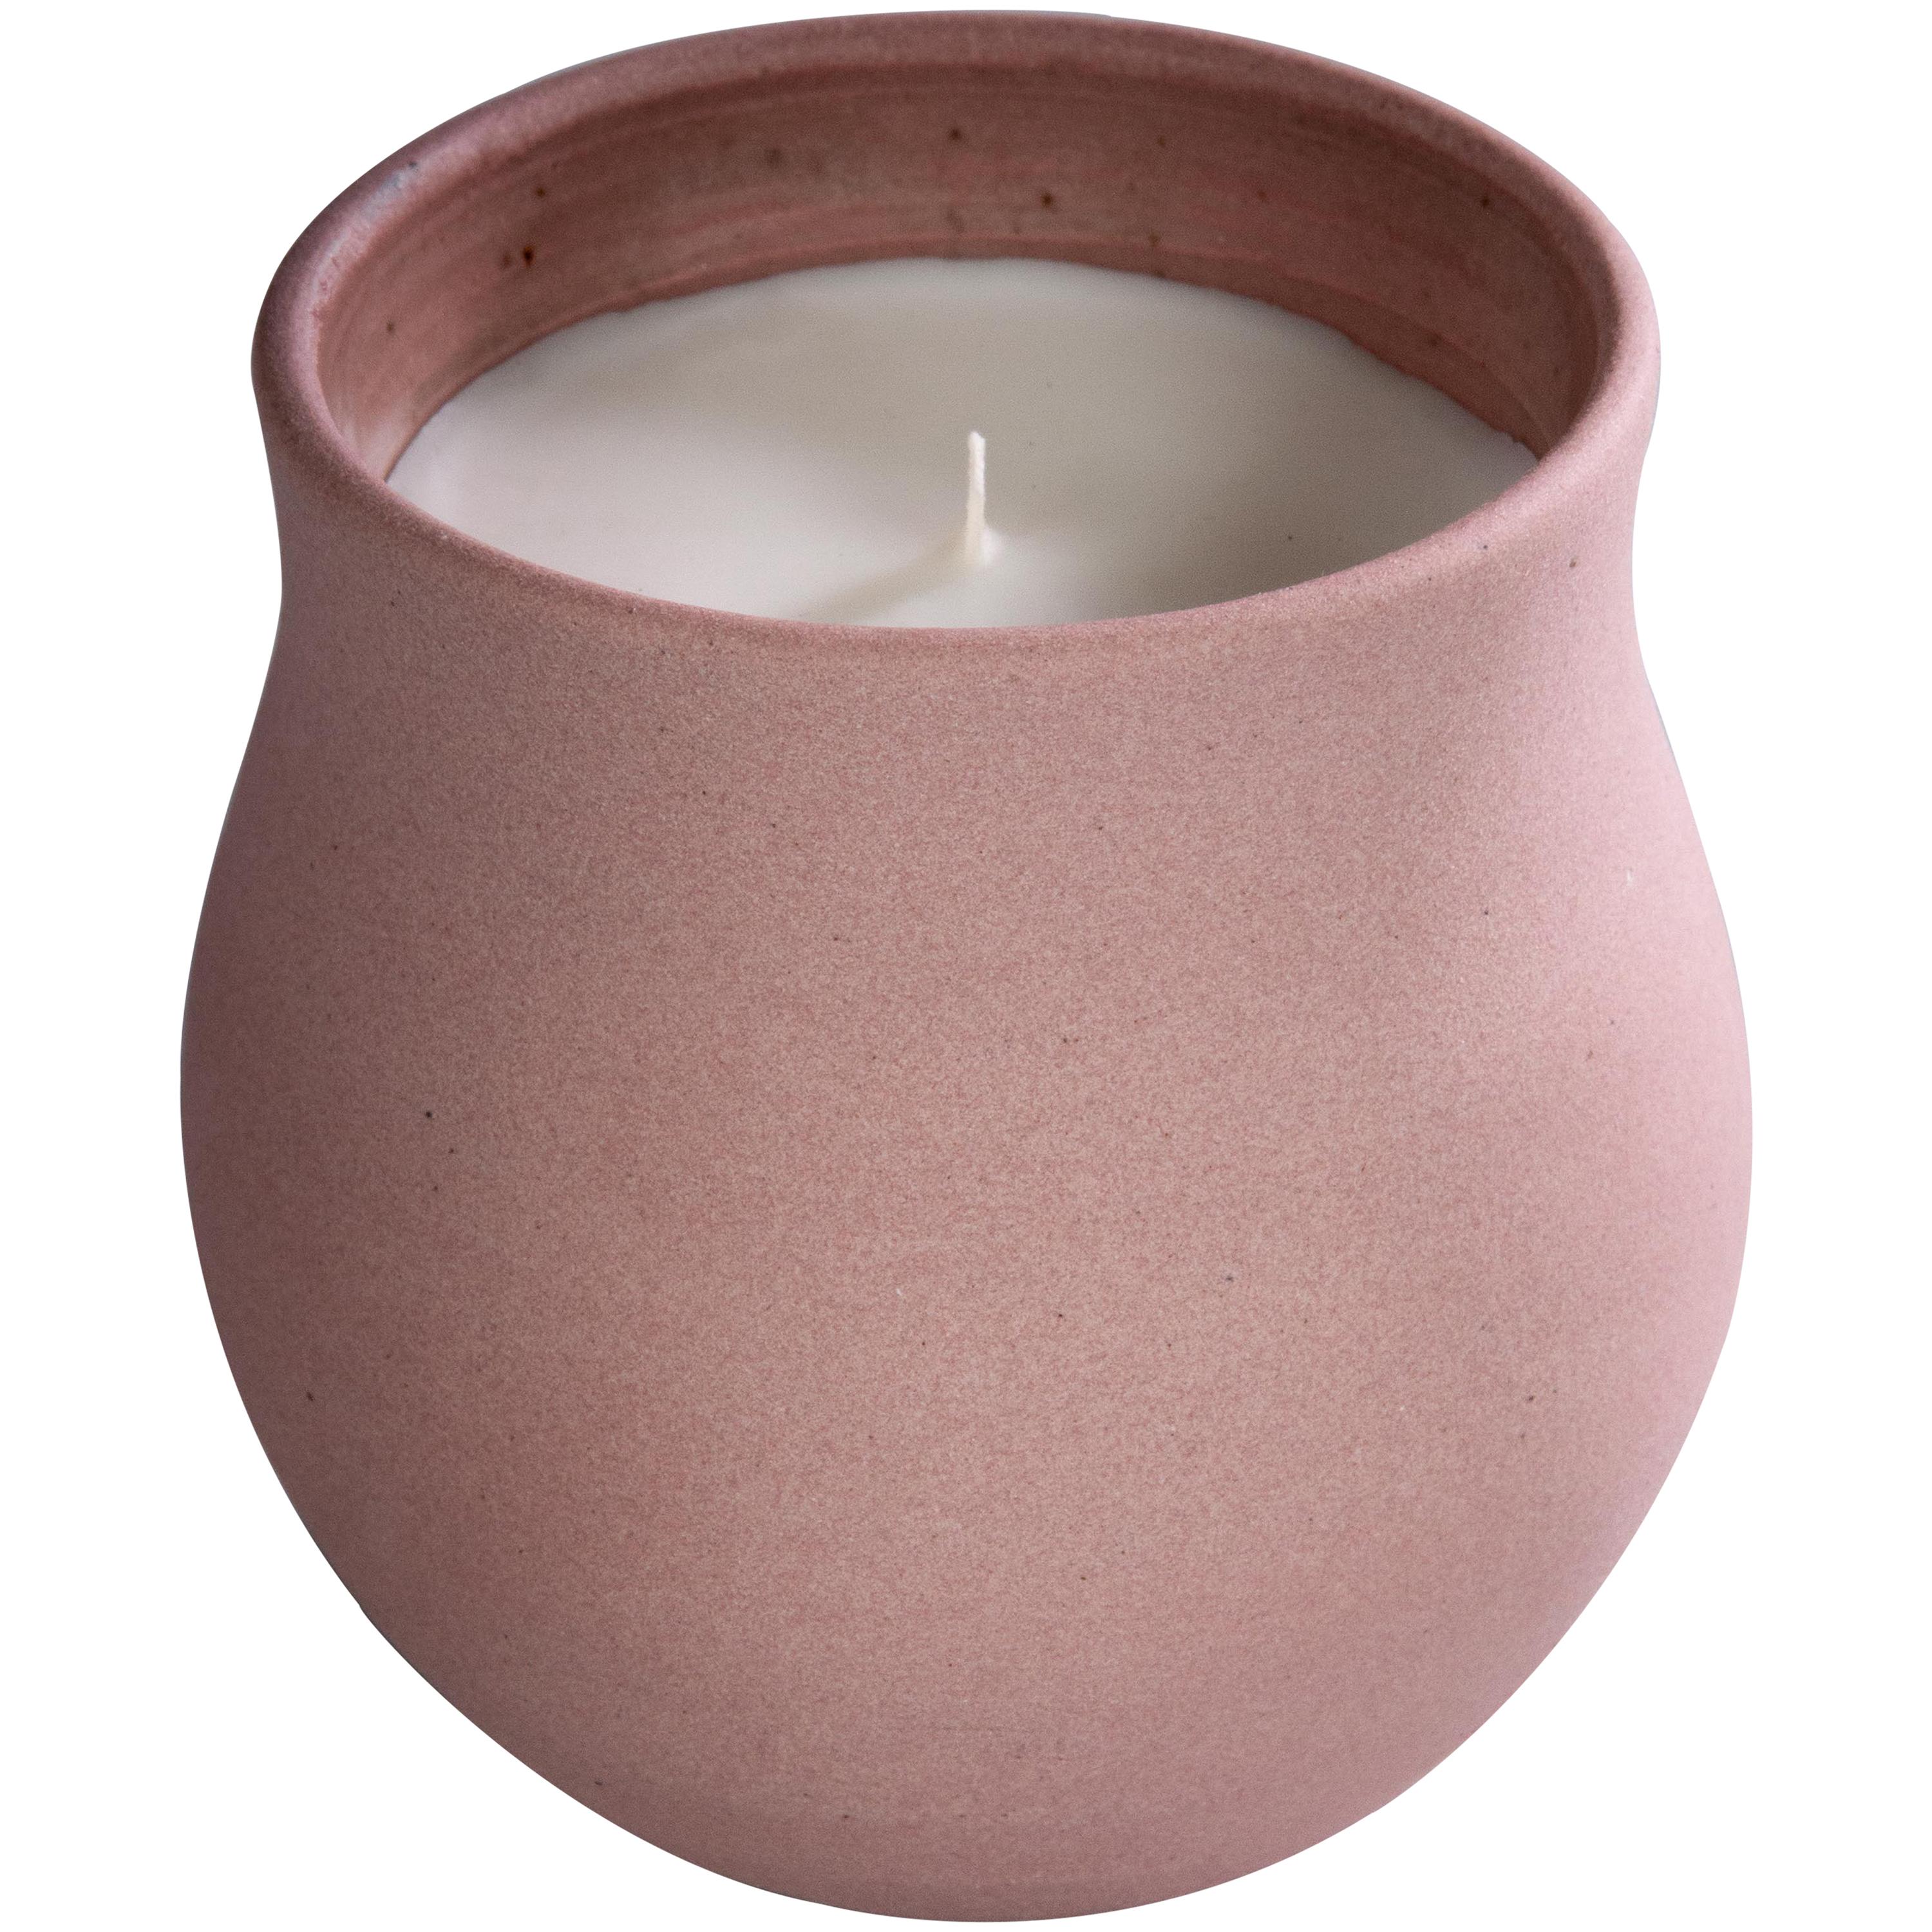 Limited-Edition Artisan Candles in Ceramic Vessels, Floral Scent, in Stock